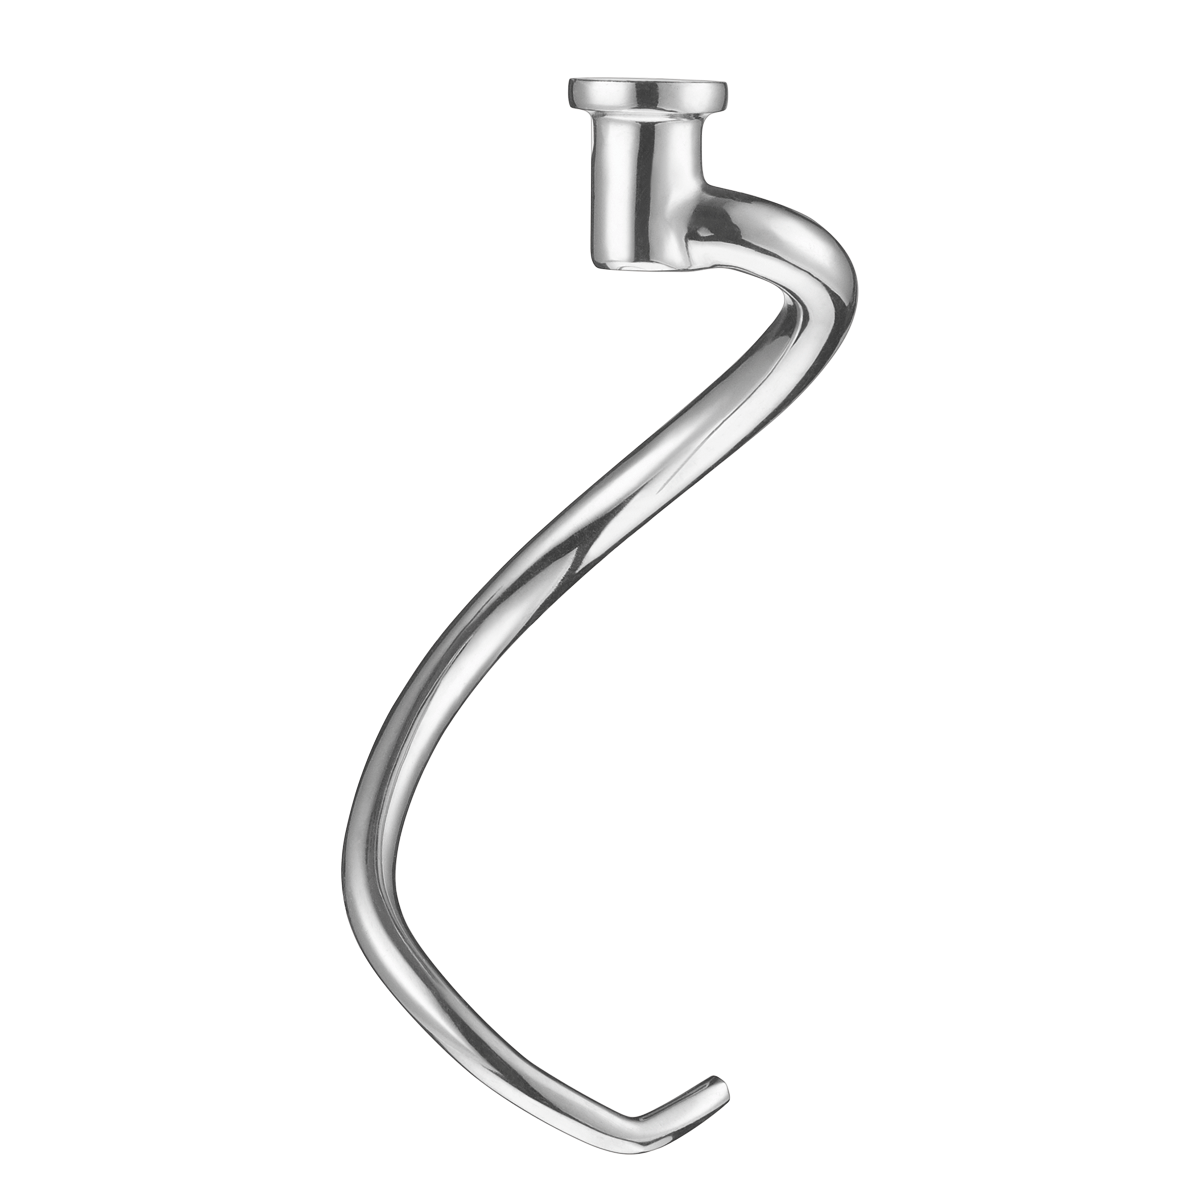 https://www.waringlab.com/assets/images/database/products/wsm7ldh-waring-lab-hook-main.png